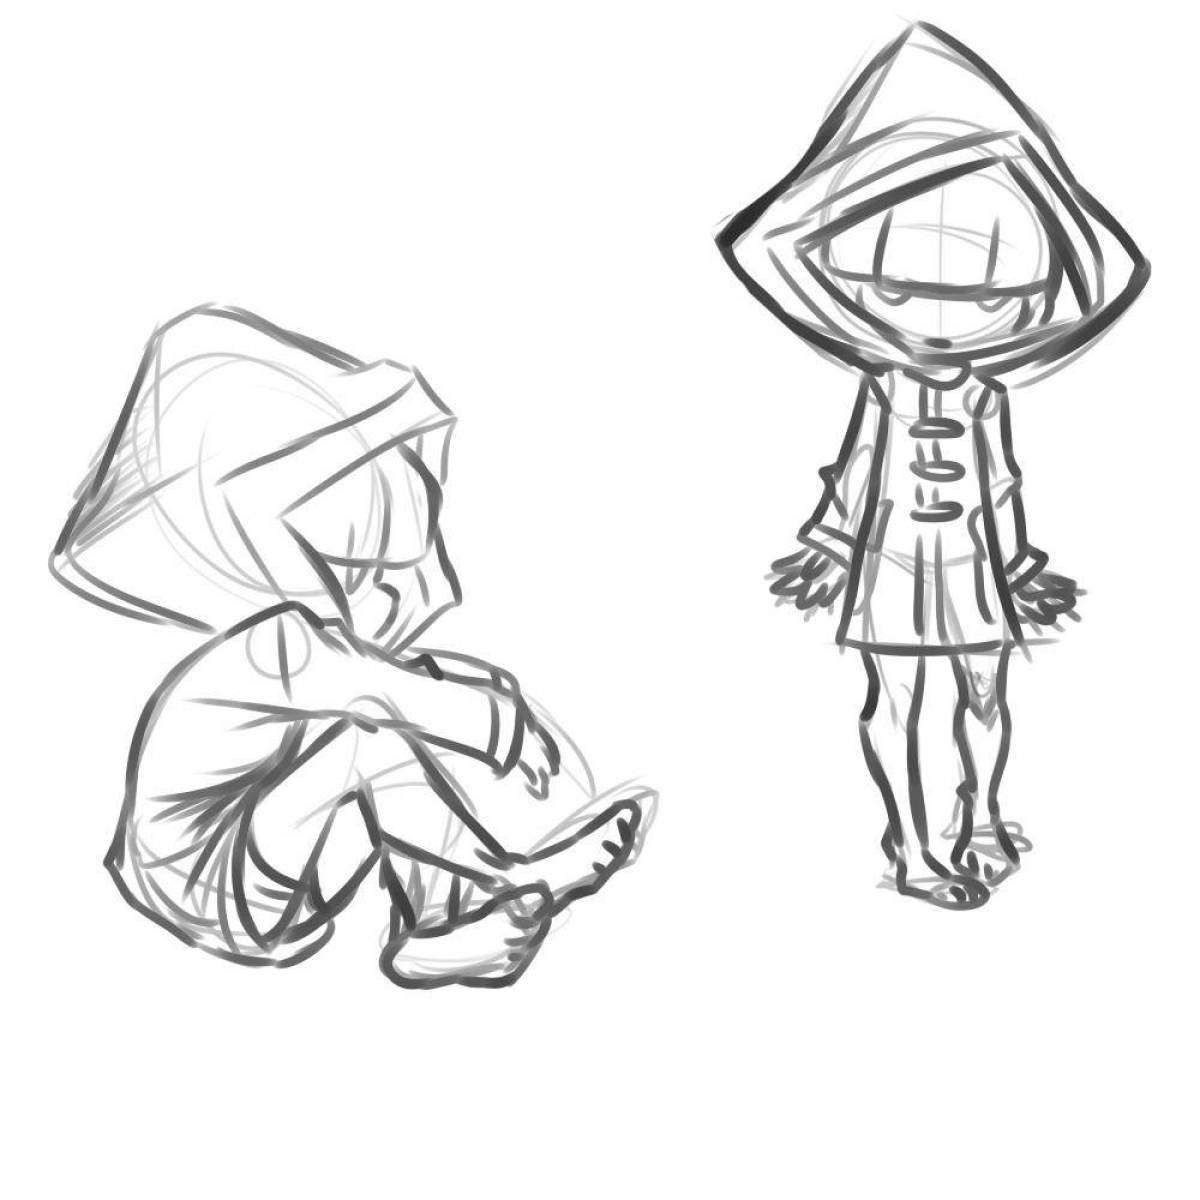 Glowing little nightmares coloring page